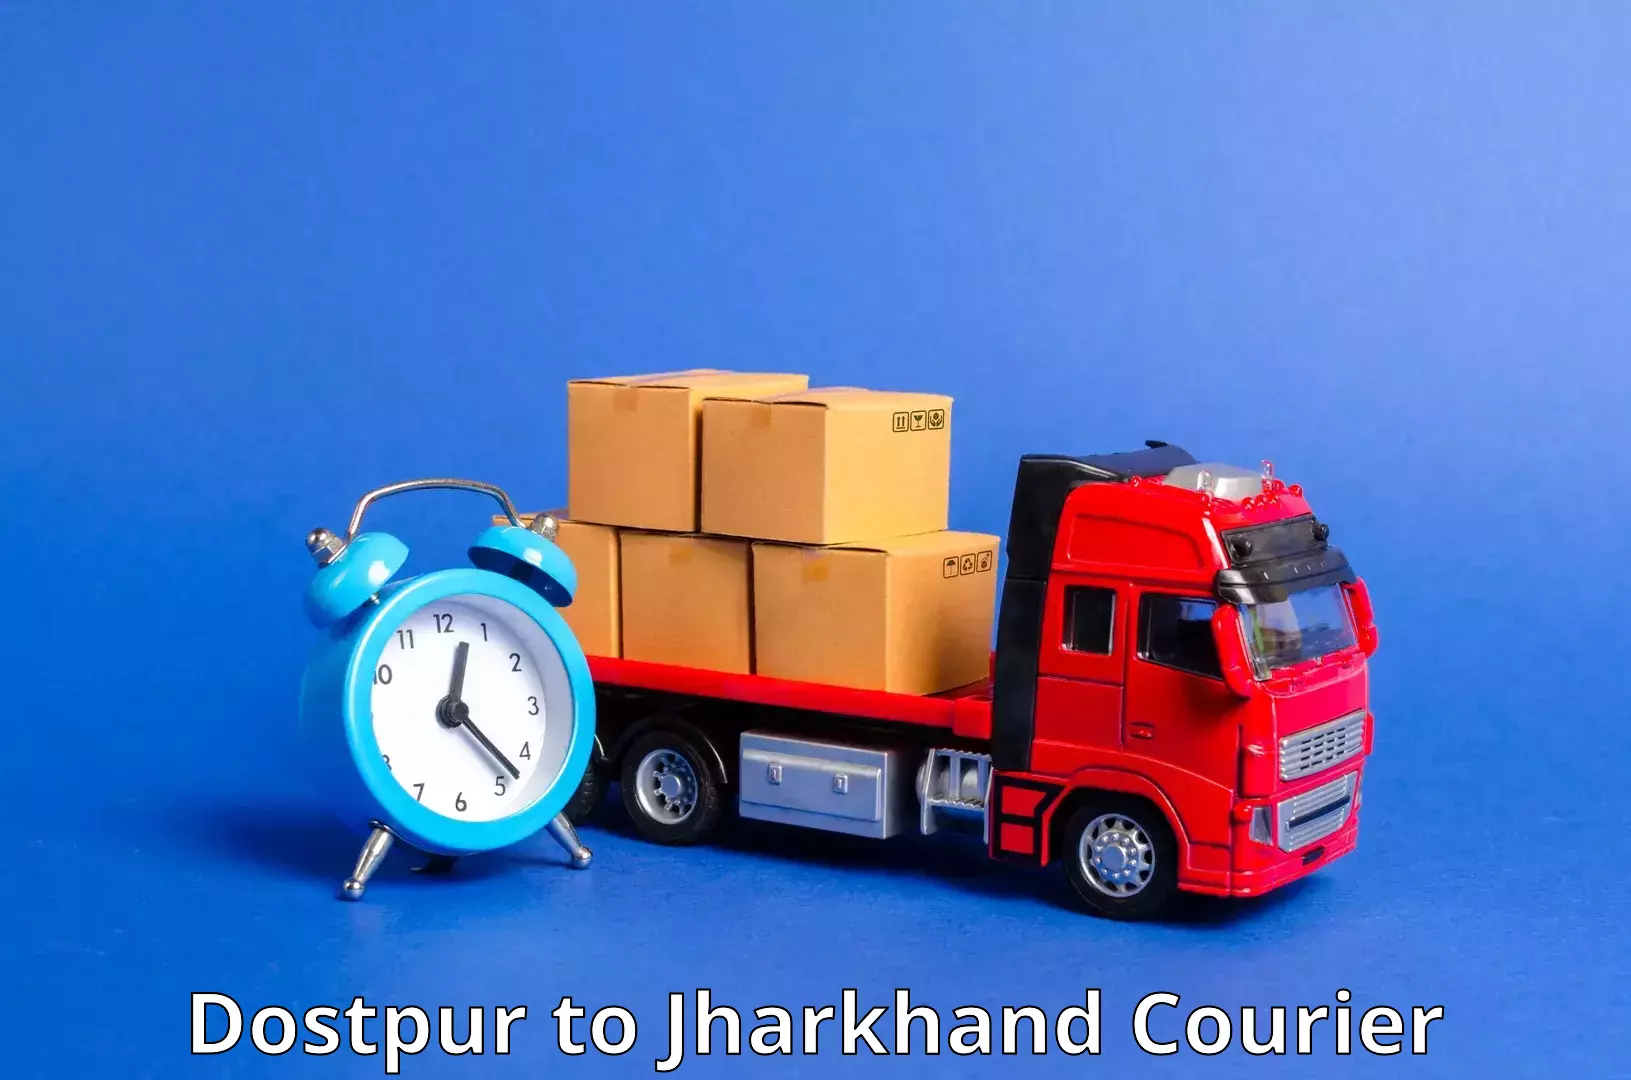 Local courier options Dostpur to Chandil